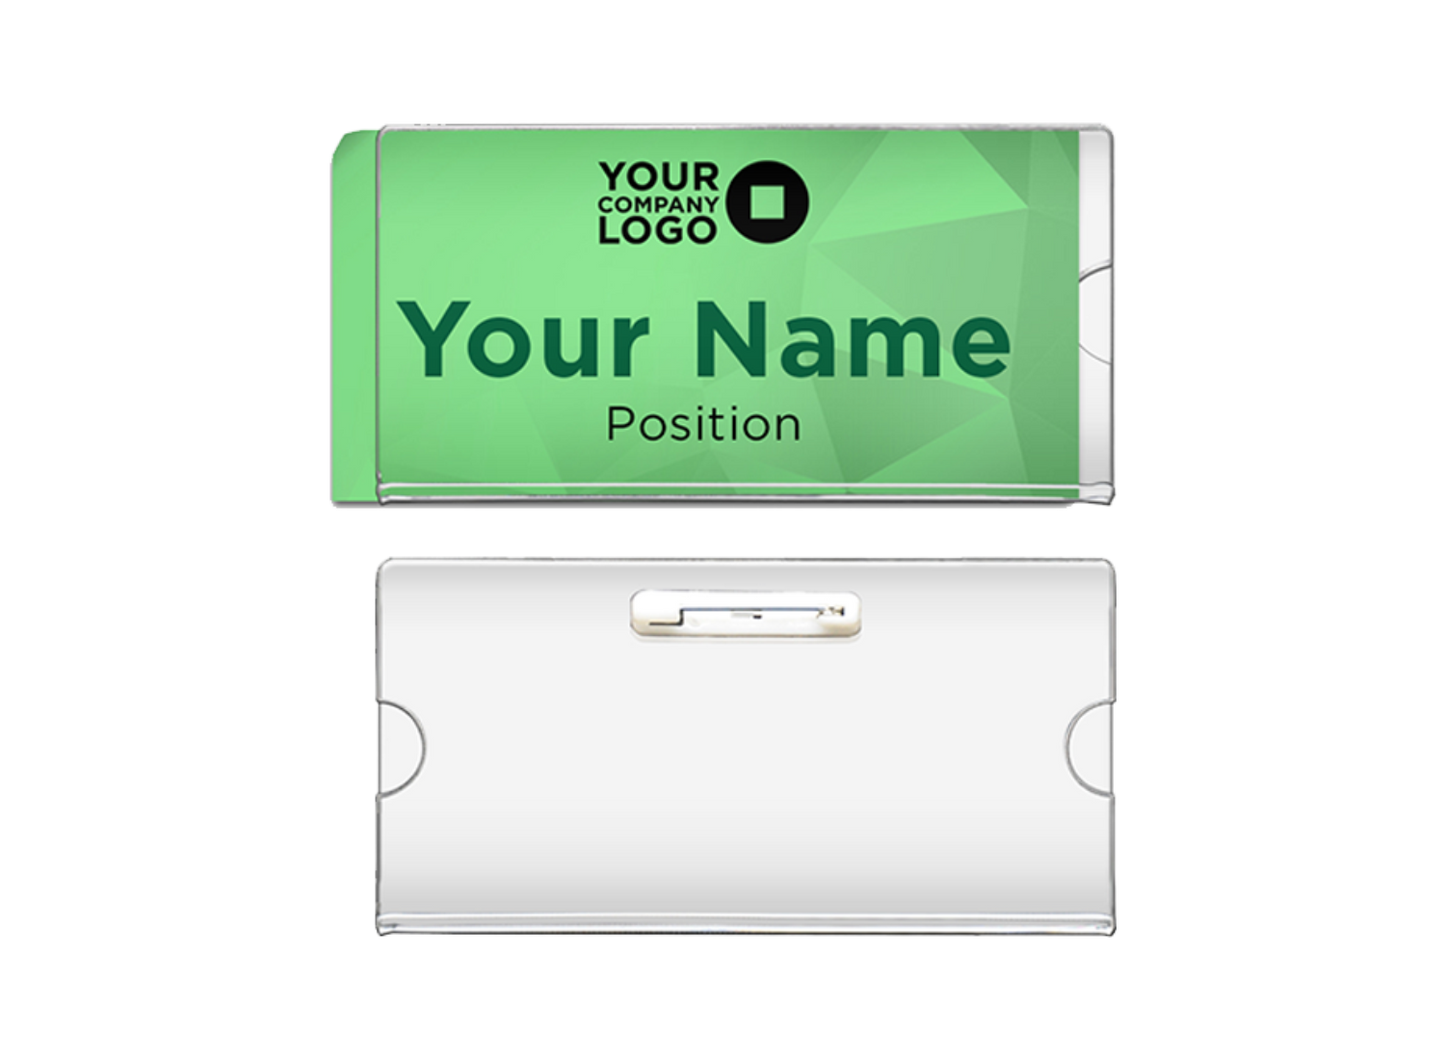 Code No.: 5006                        _                  Size: 2.0" x 4.0"                Insertable Nameplate with Safety Pin